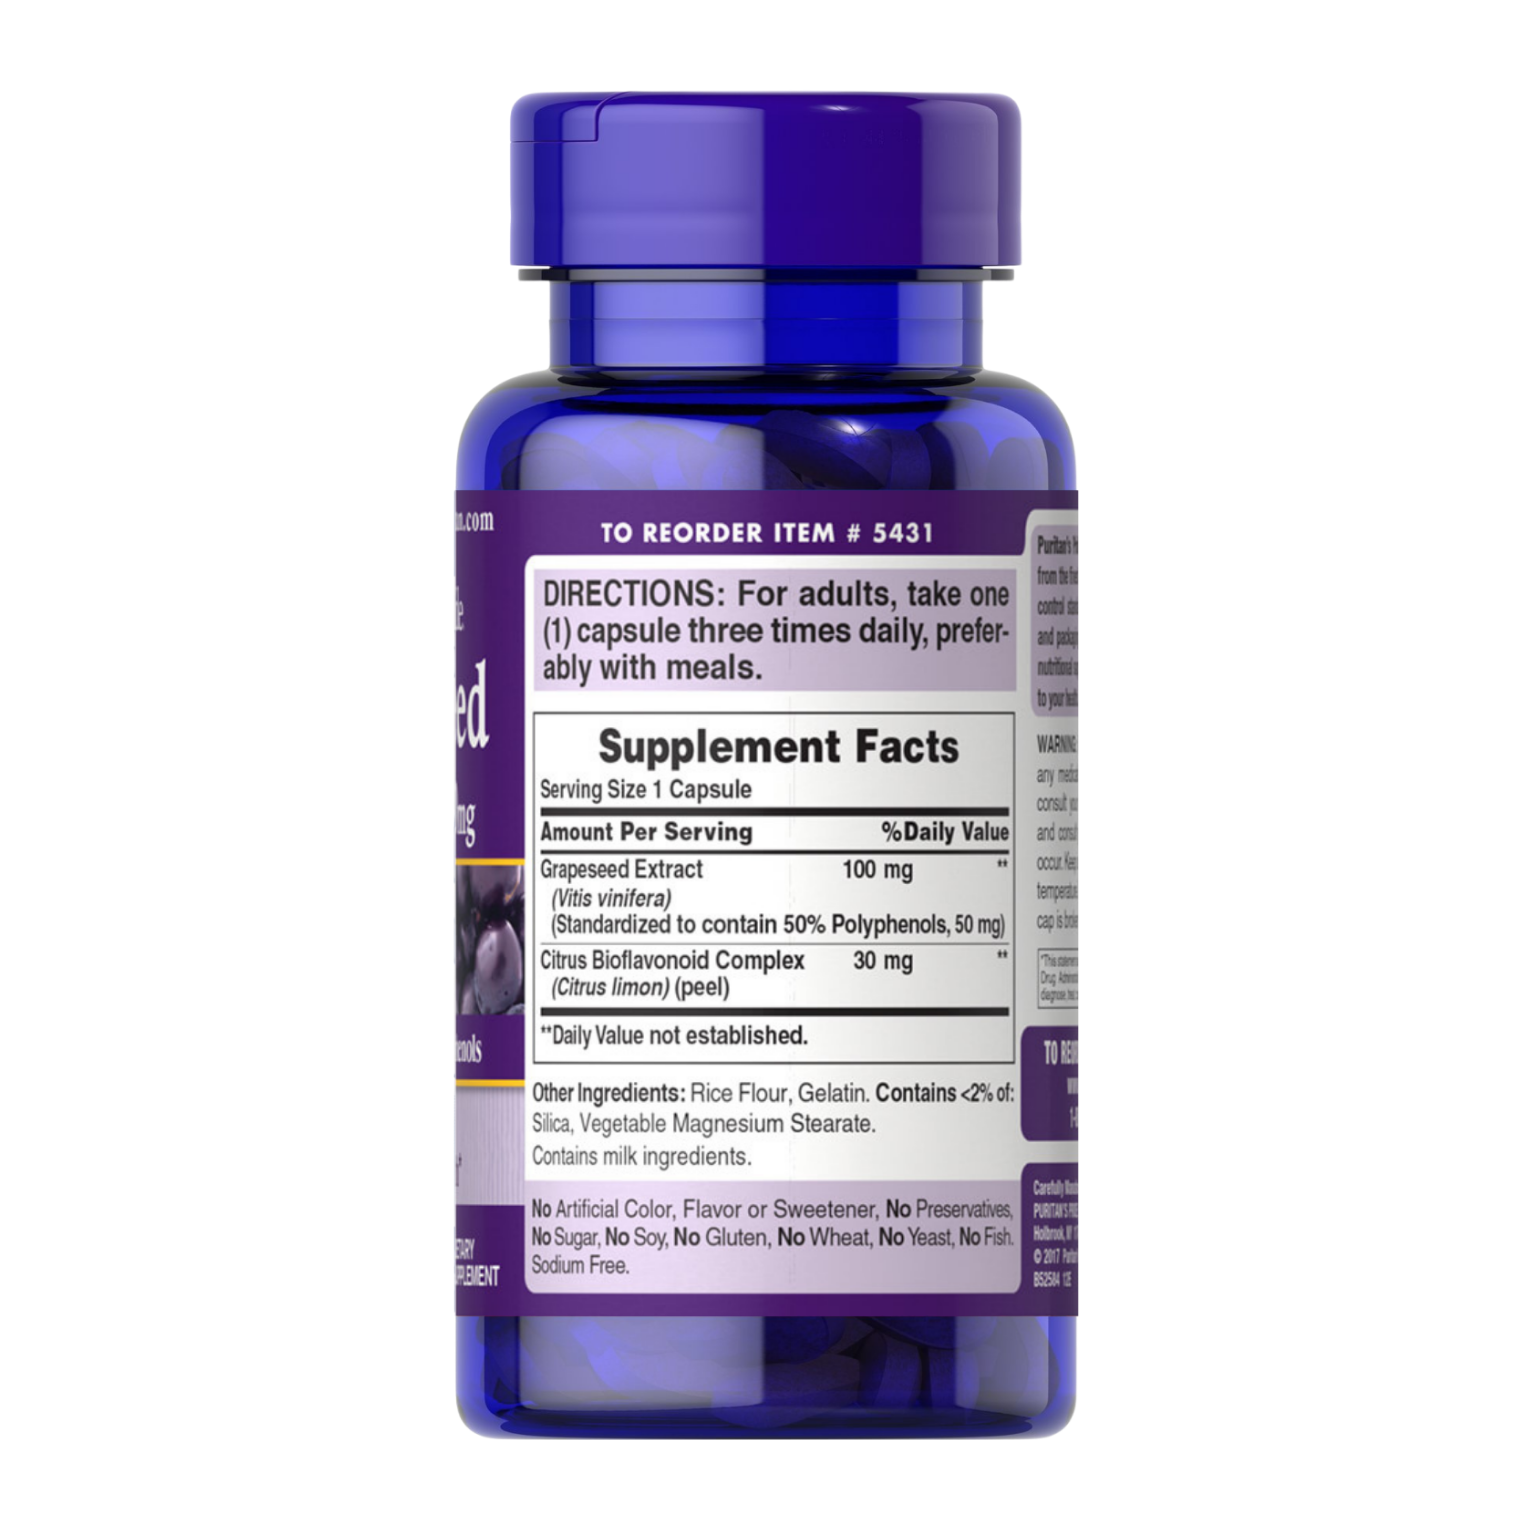 Puritan's Pride Grapeseed Extract 100 mg / 100 Capsules